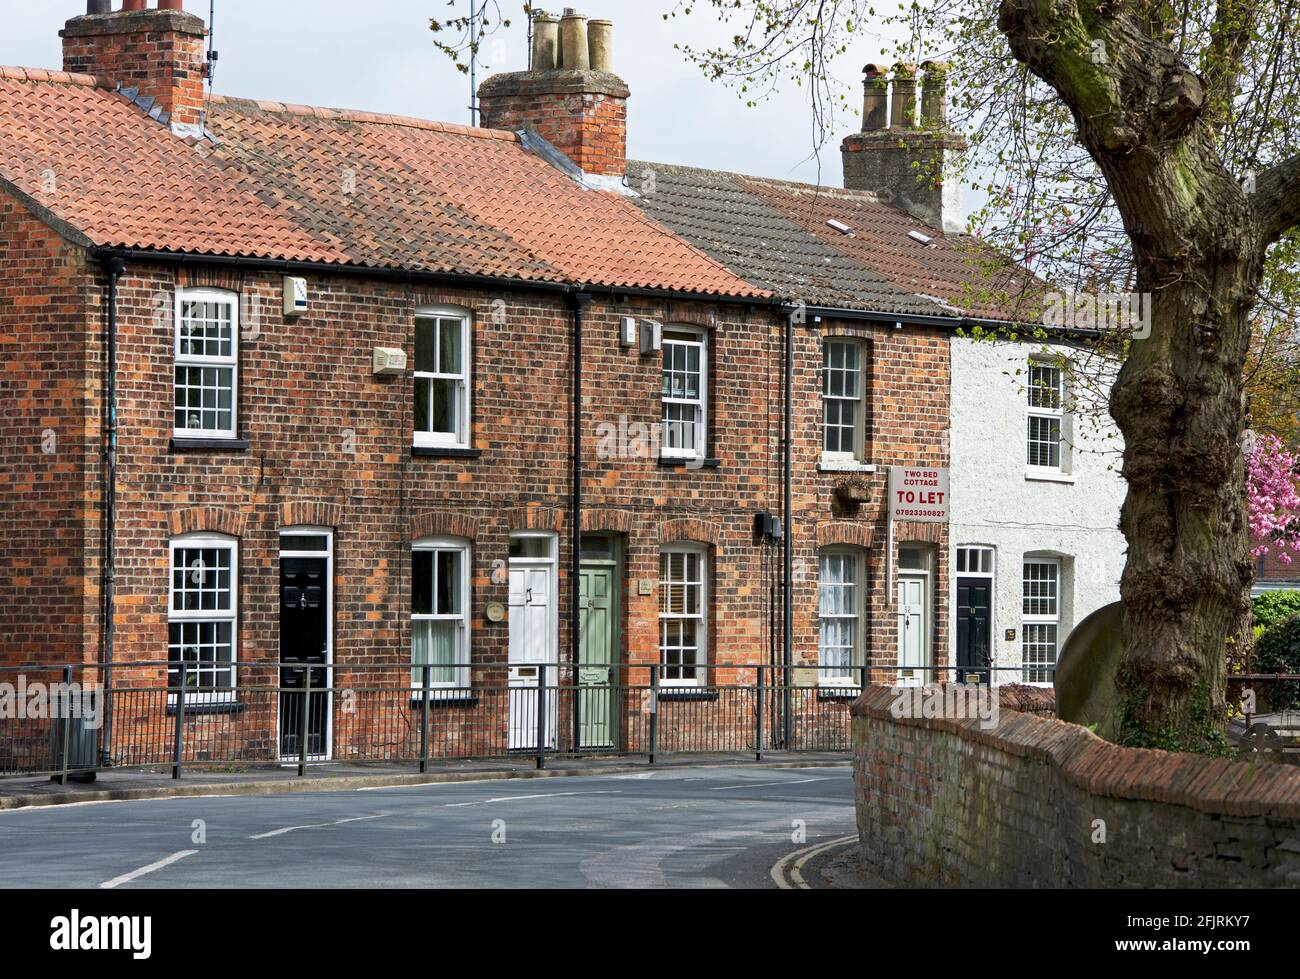 Row of brick-built terraced houses in Cottingham, East Yorkshire, England UK Stock Photo